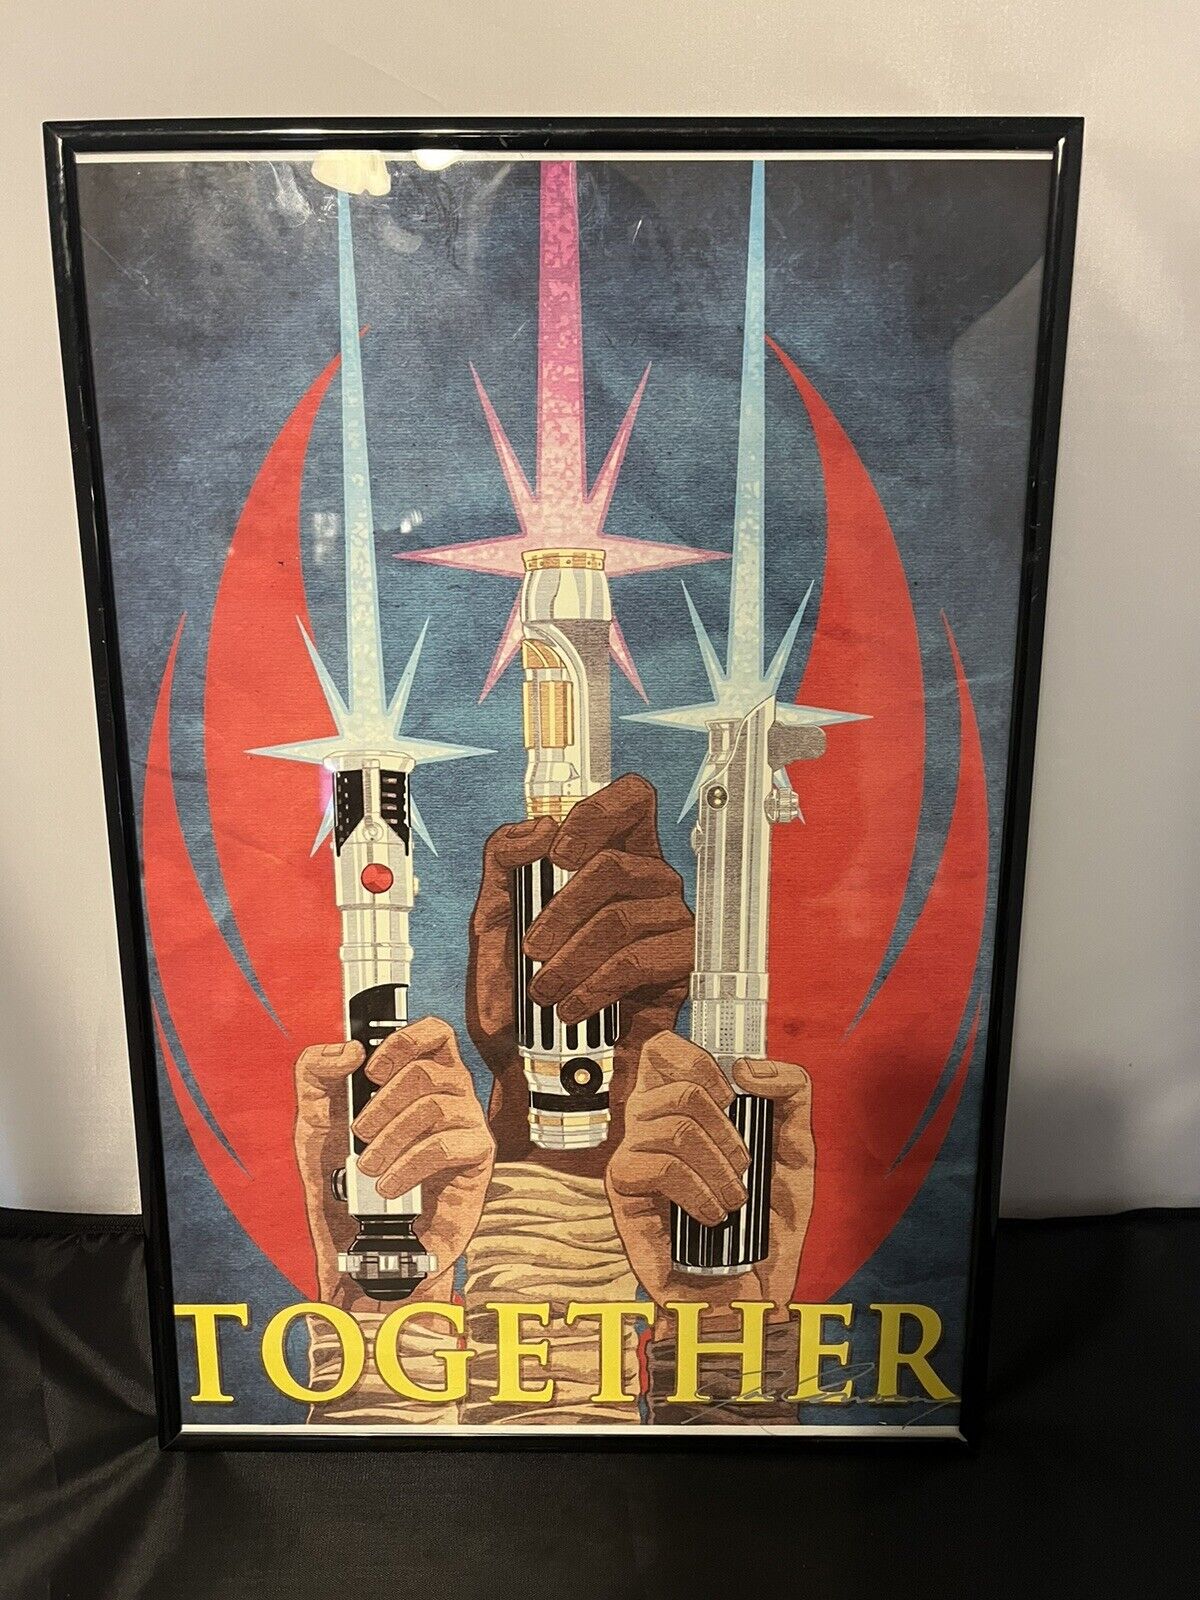 “Together” Poster Print by Joe Corroney - SIGNED